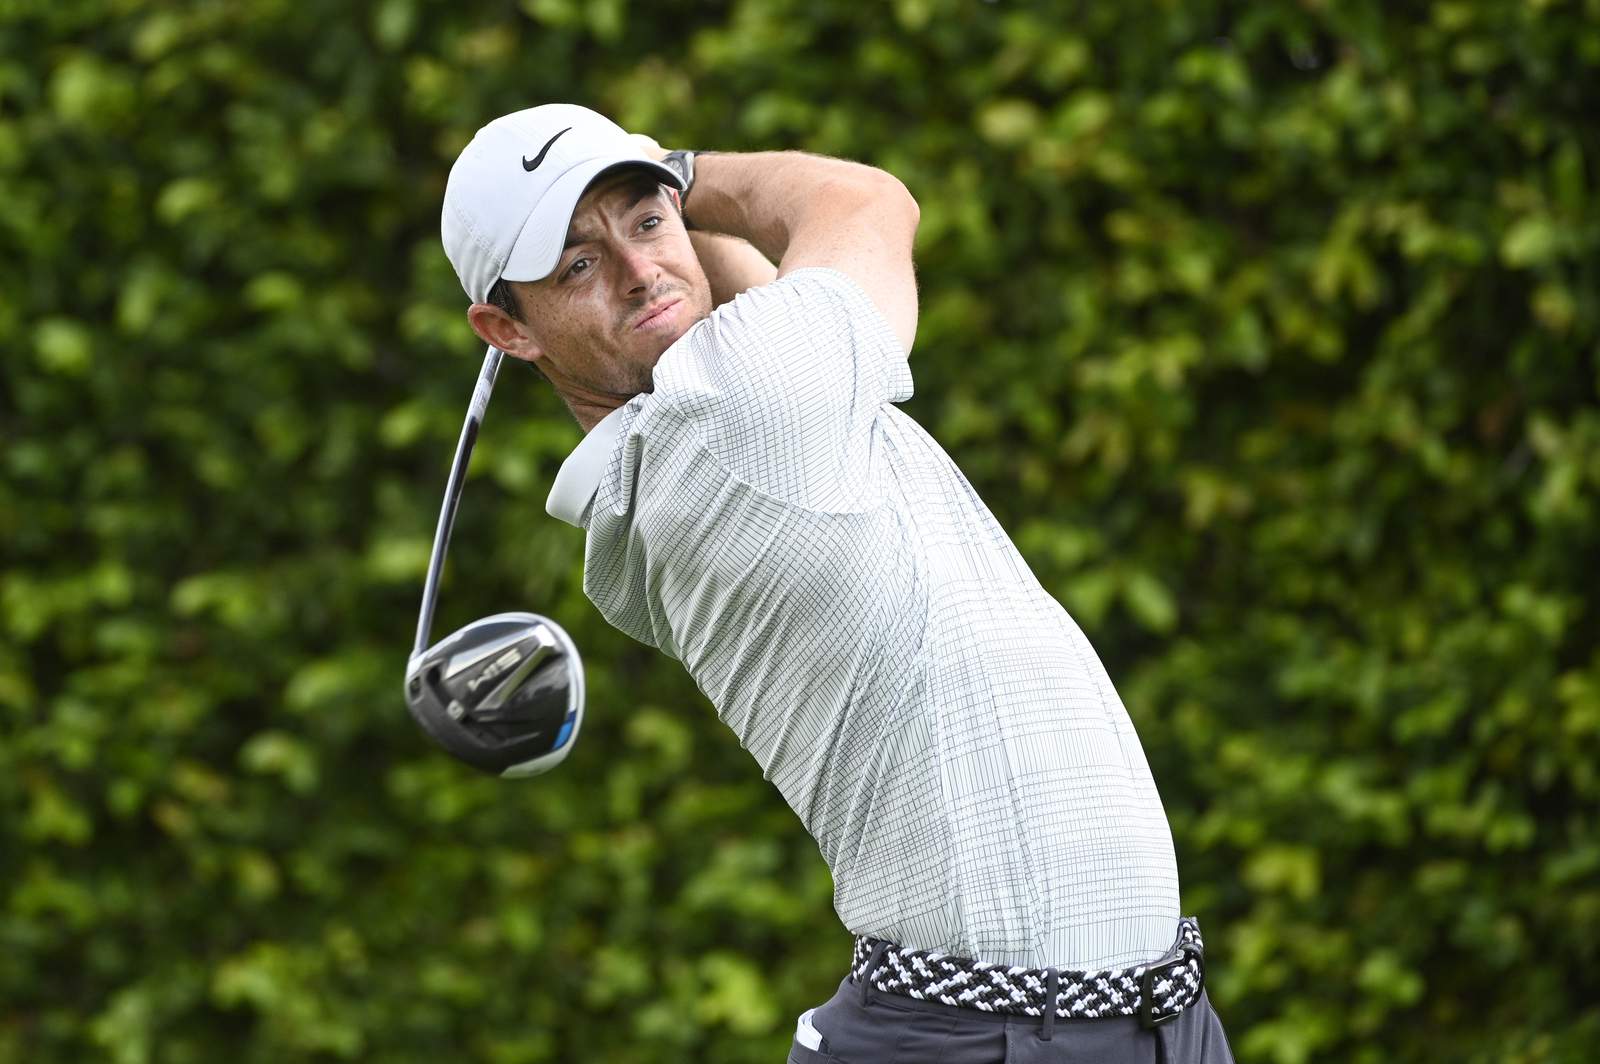 Every delivers again at Bay Hill, leads McIlroy by 1 shot